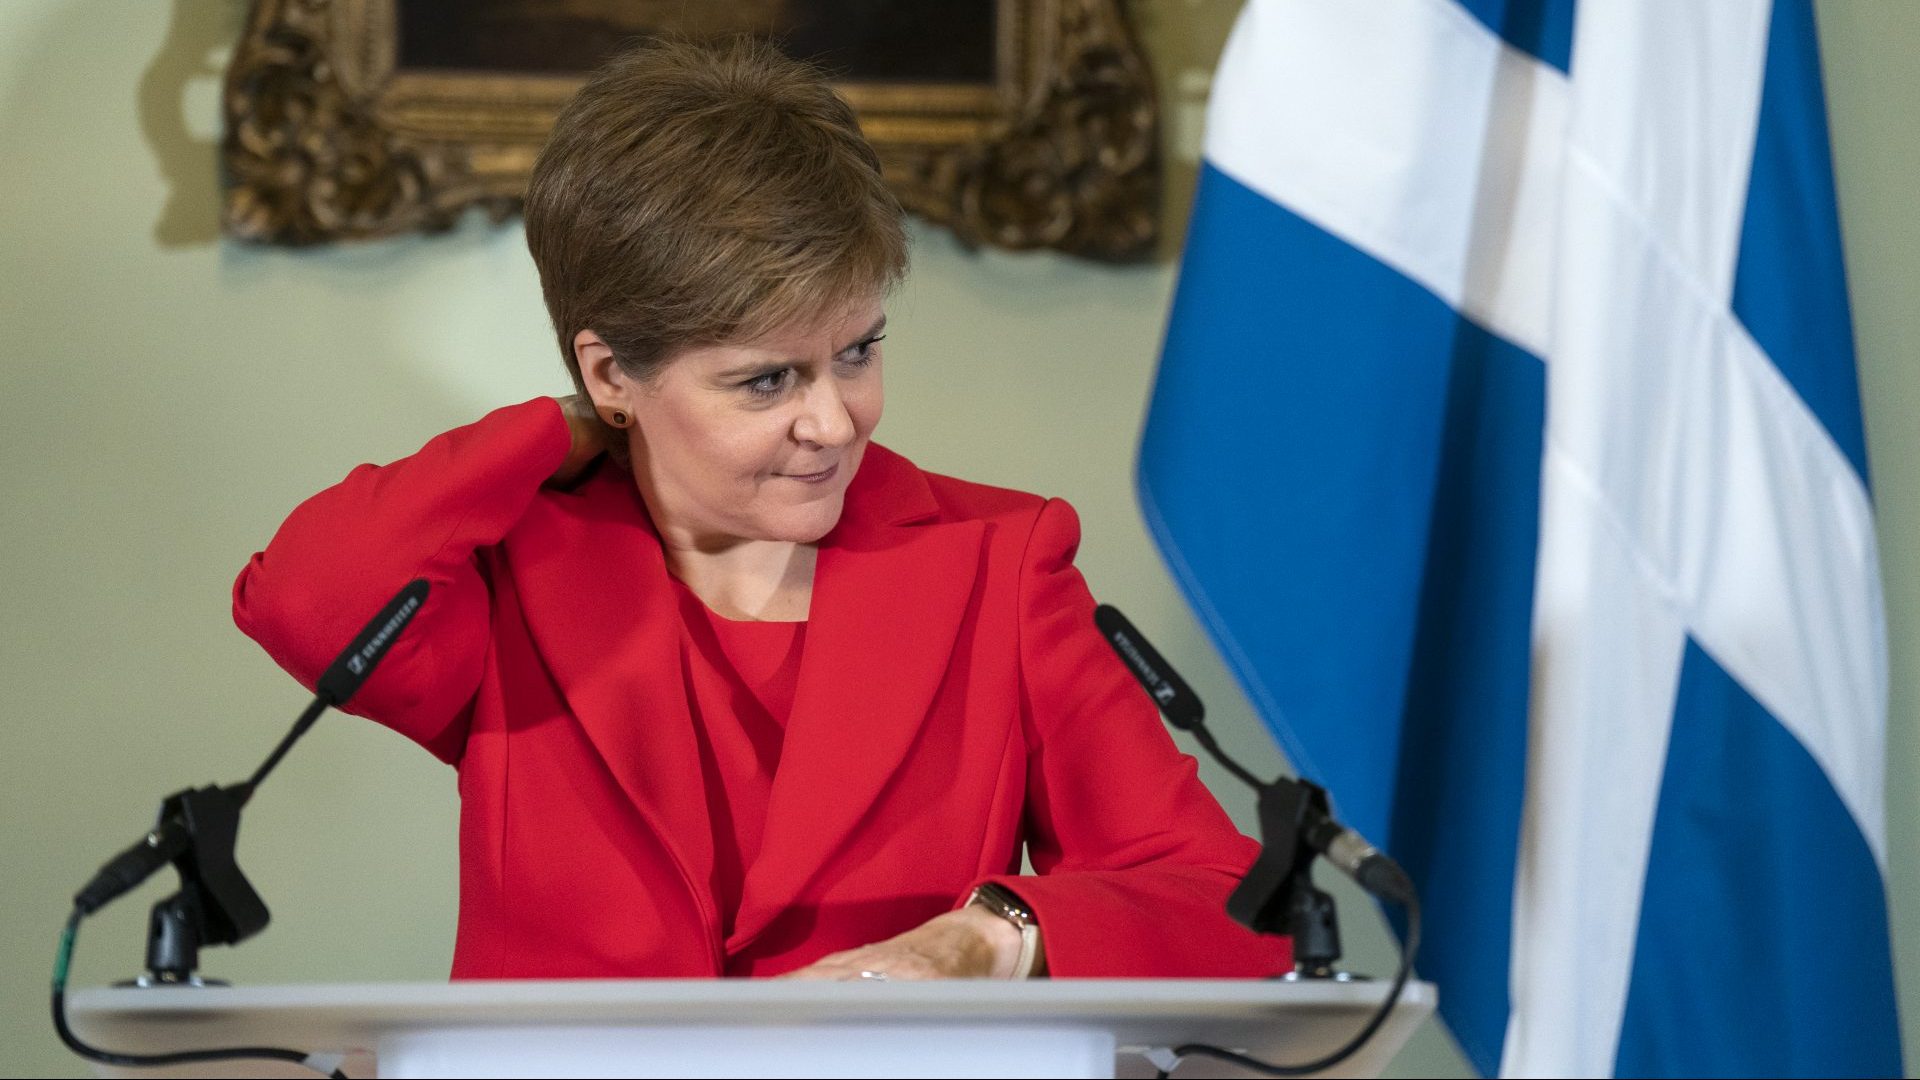  Nicola Sturgeon speaks during a press conference at Bute House where she announced she will stand down as First Minister of Scotland. Photo: Jane Barlow - Pool/Getty Images